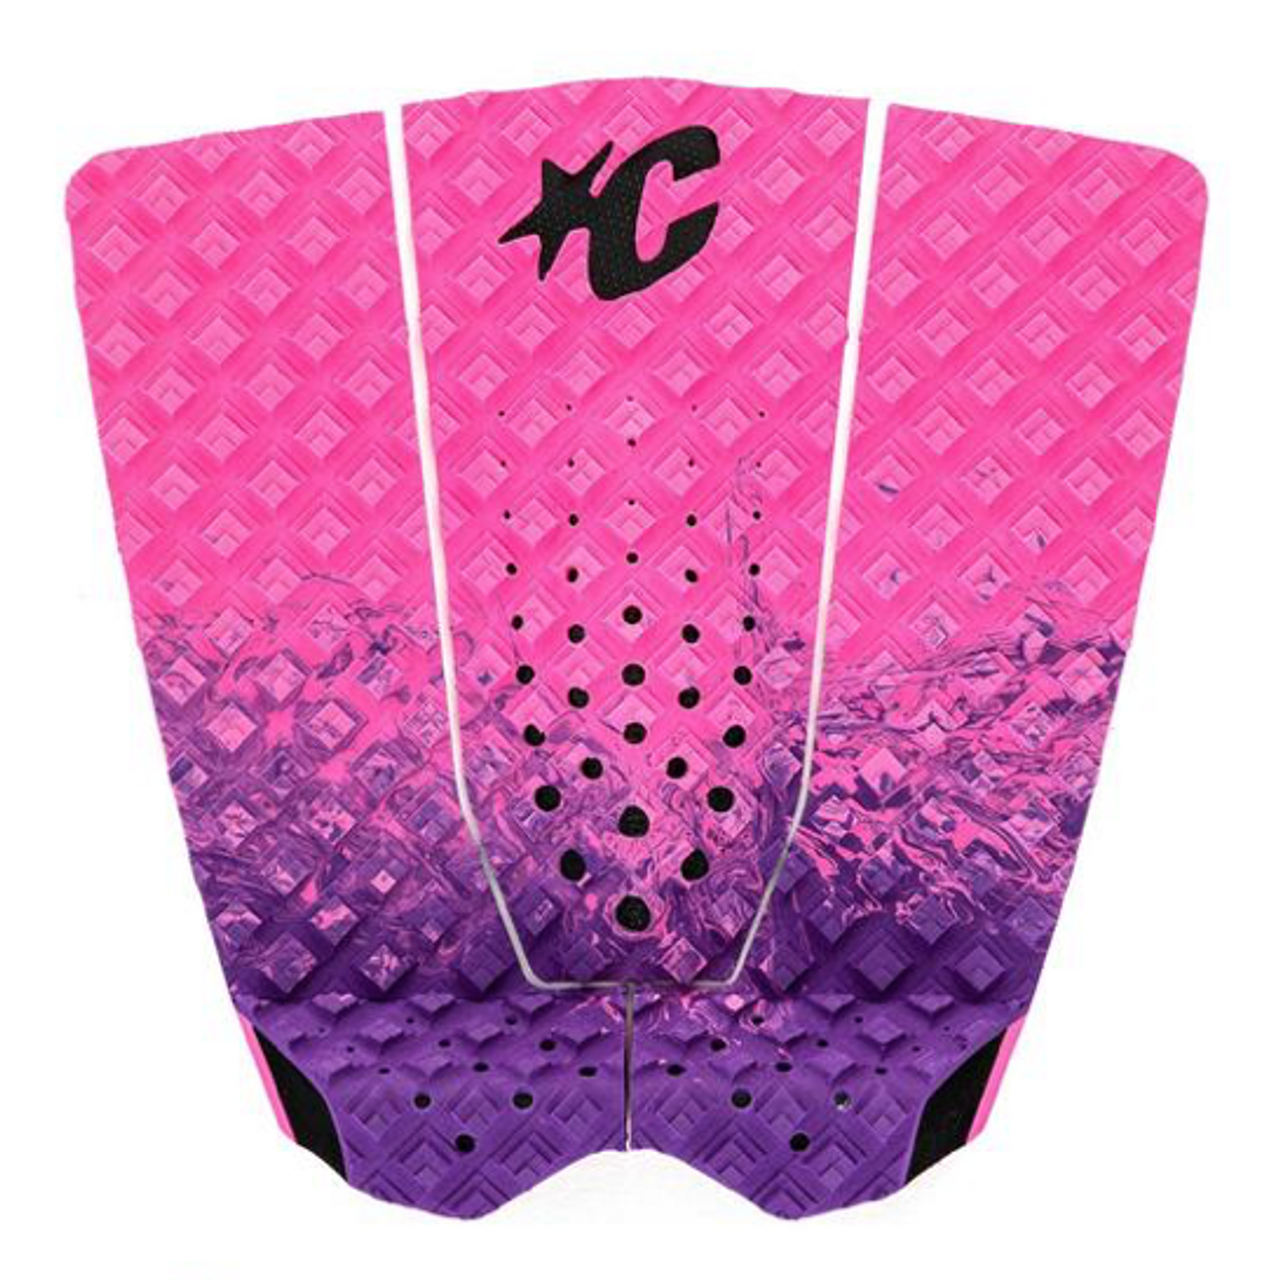 TRACTION PAD CREATURES - GRIFFIN COLAPINTO 3pz PINK FADE PURPLE